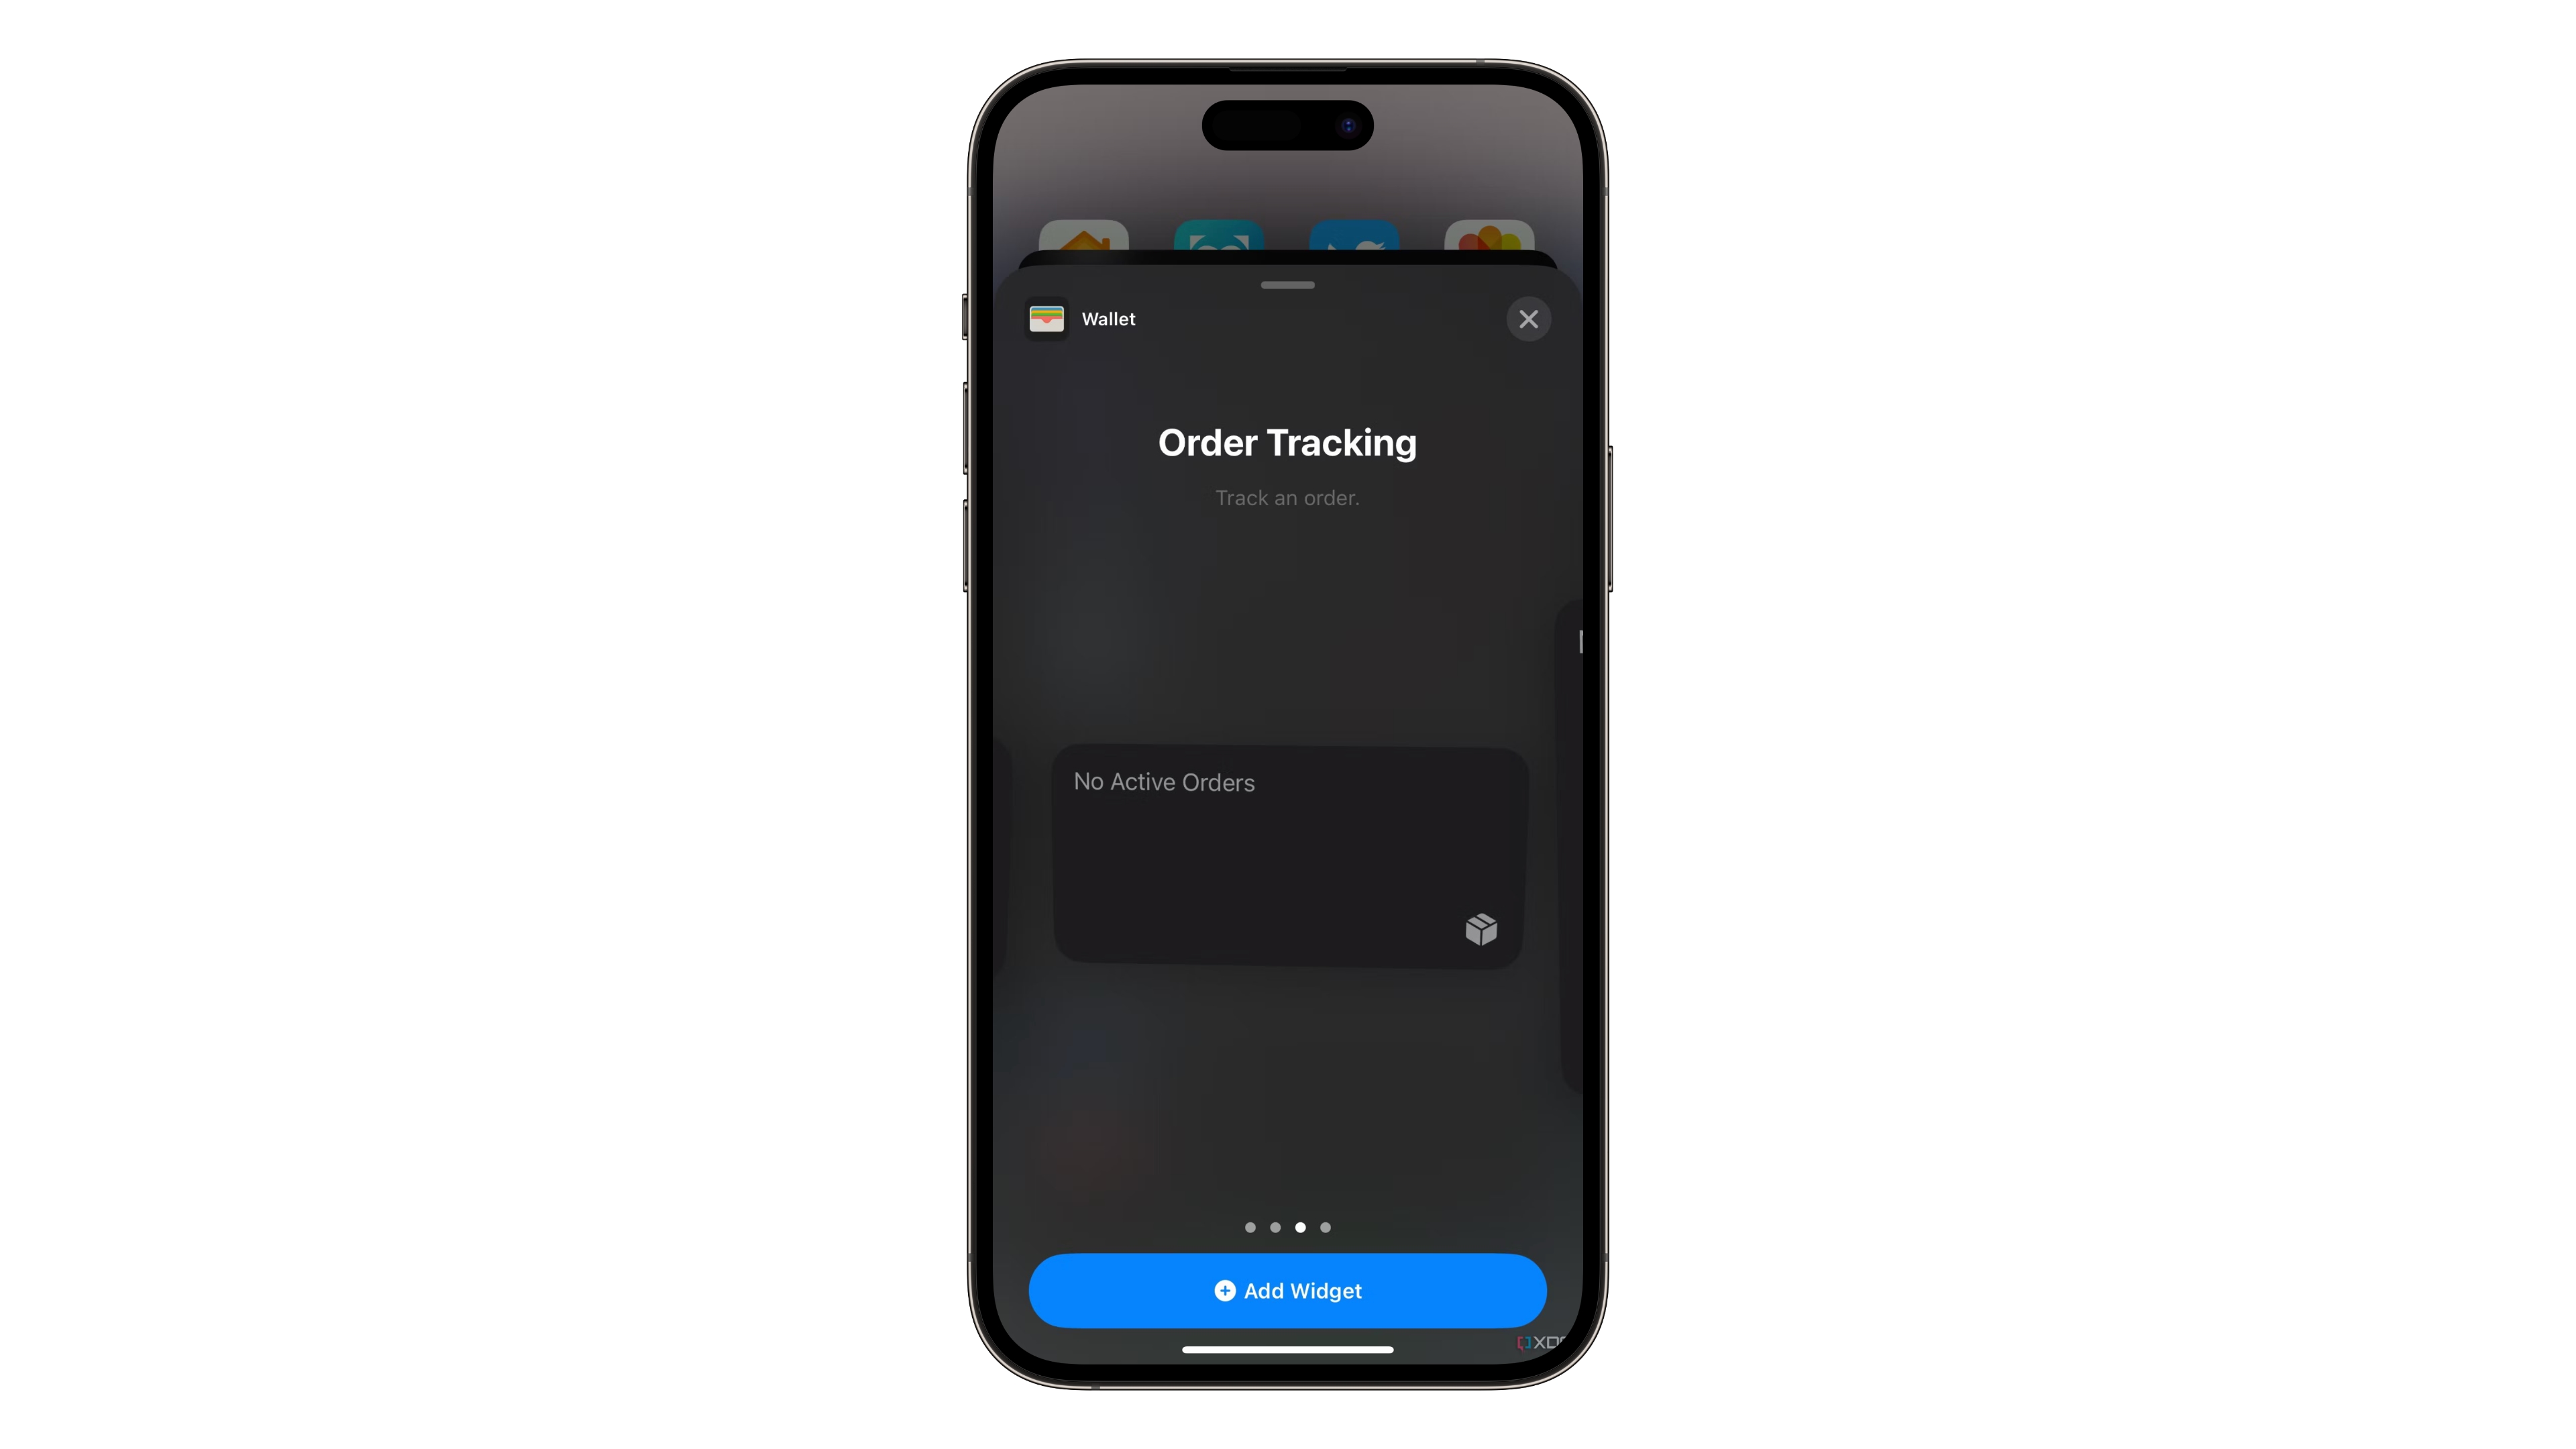 The new Wallet Order Tracking widget in iOS 16.4 for Apple Pay purchases